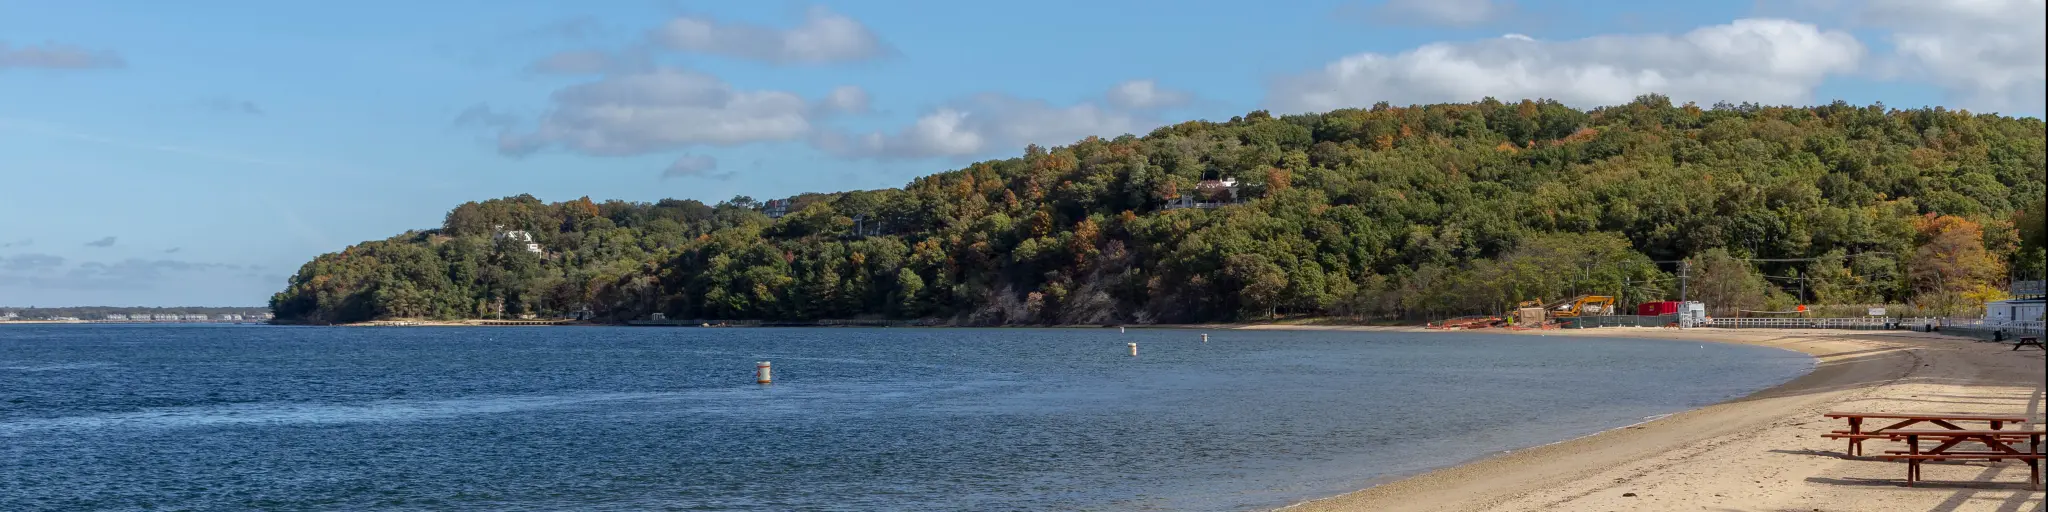 A shoreline in Shelter Island during a bright sunny day.